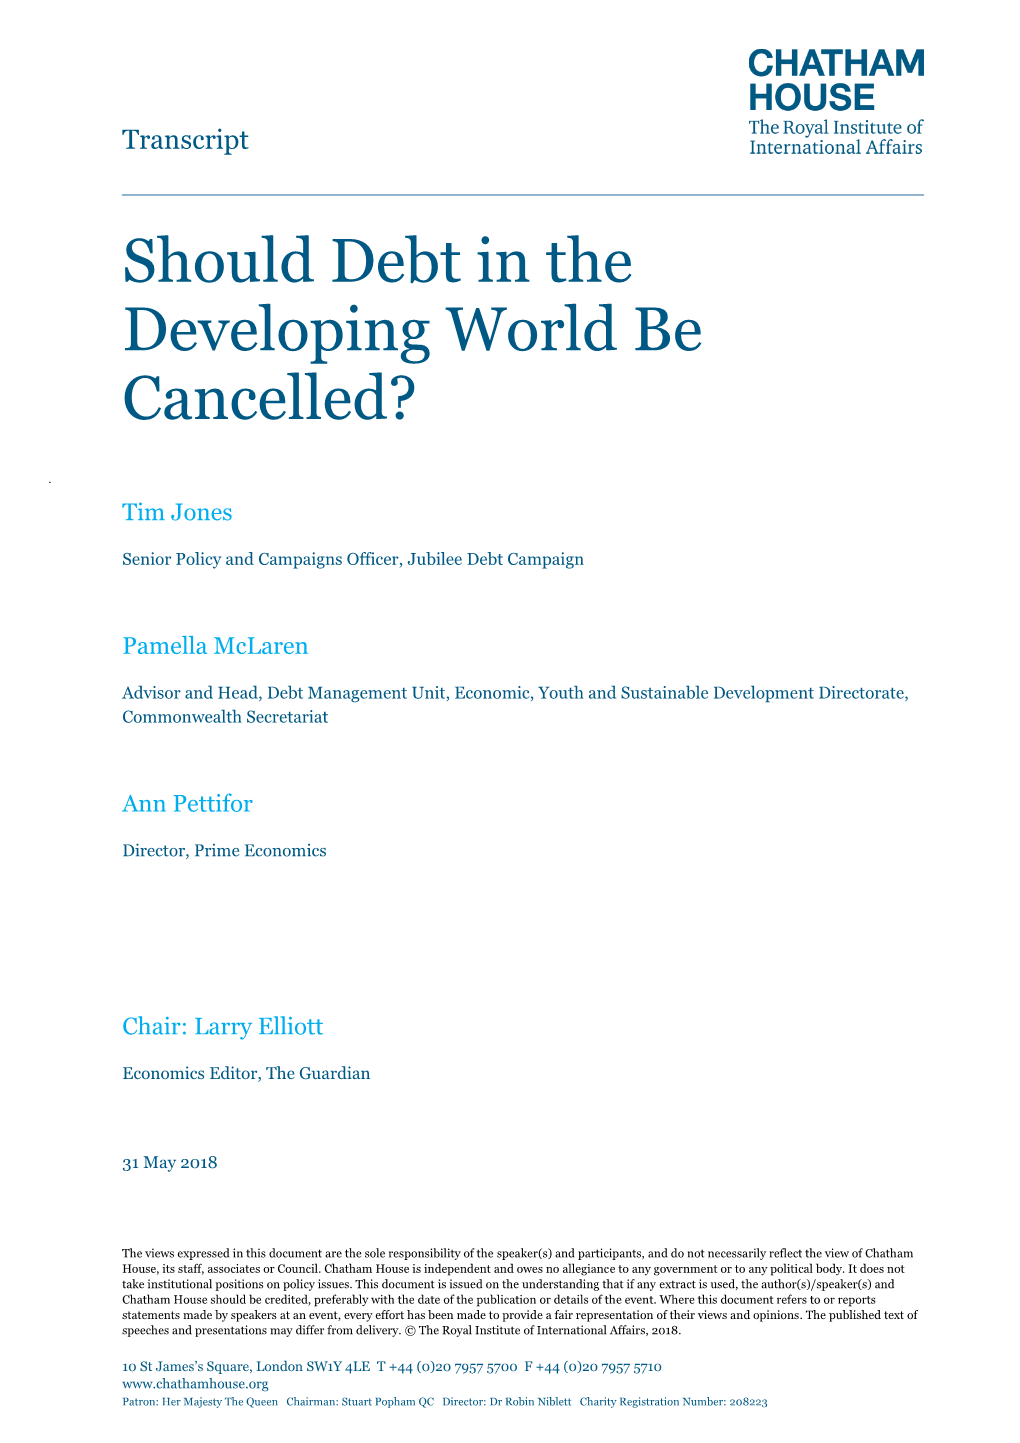 Should Debt in the Developing World Be Cancelled?